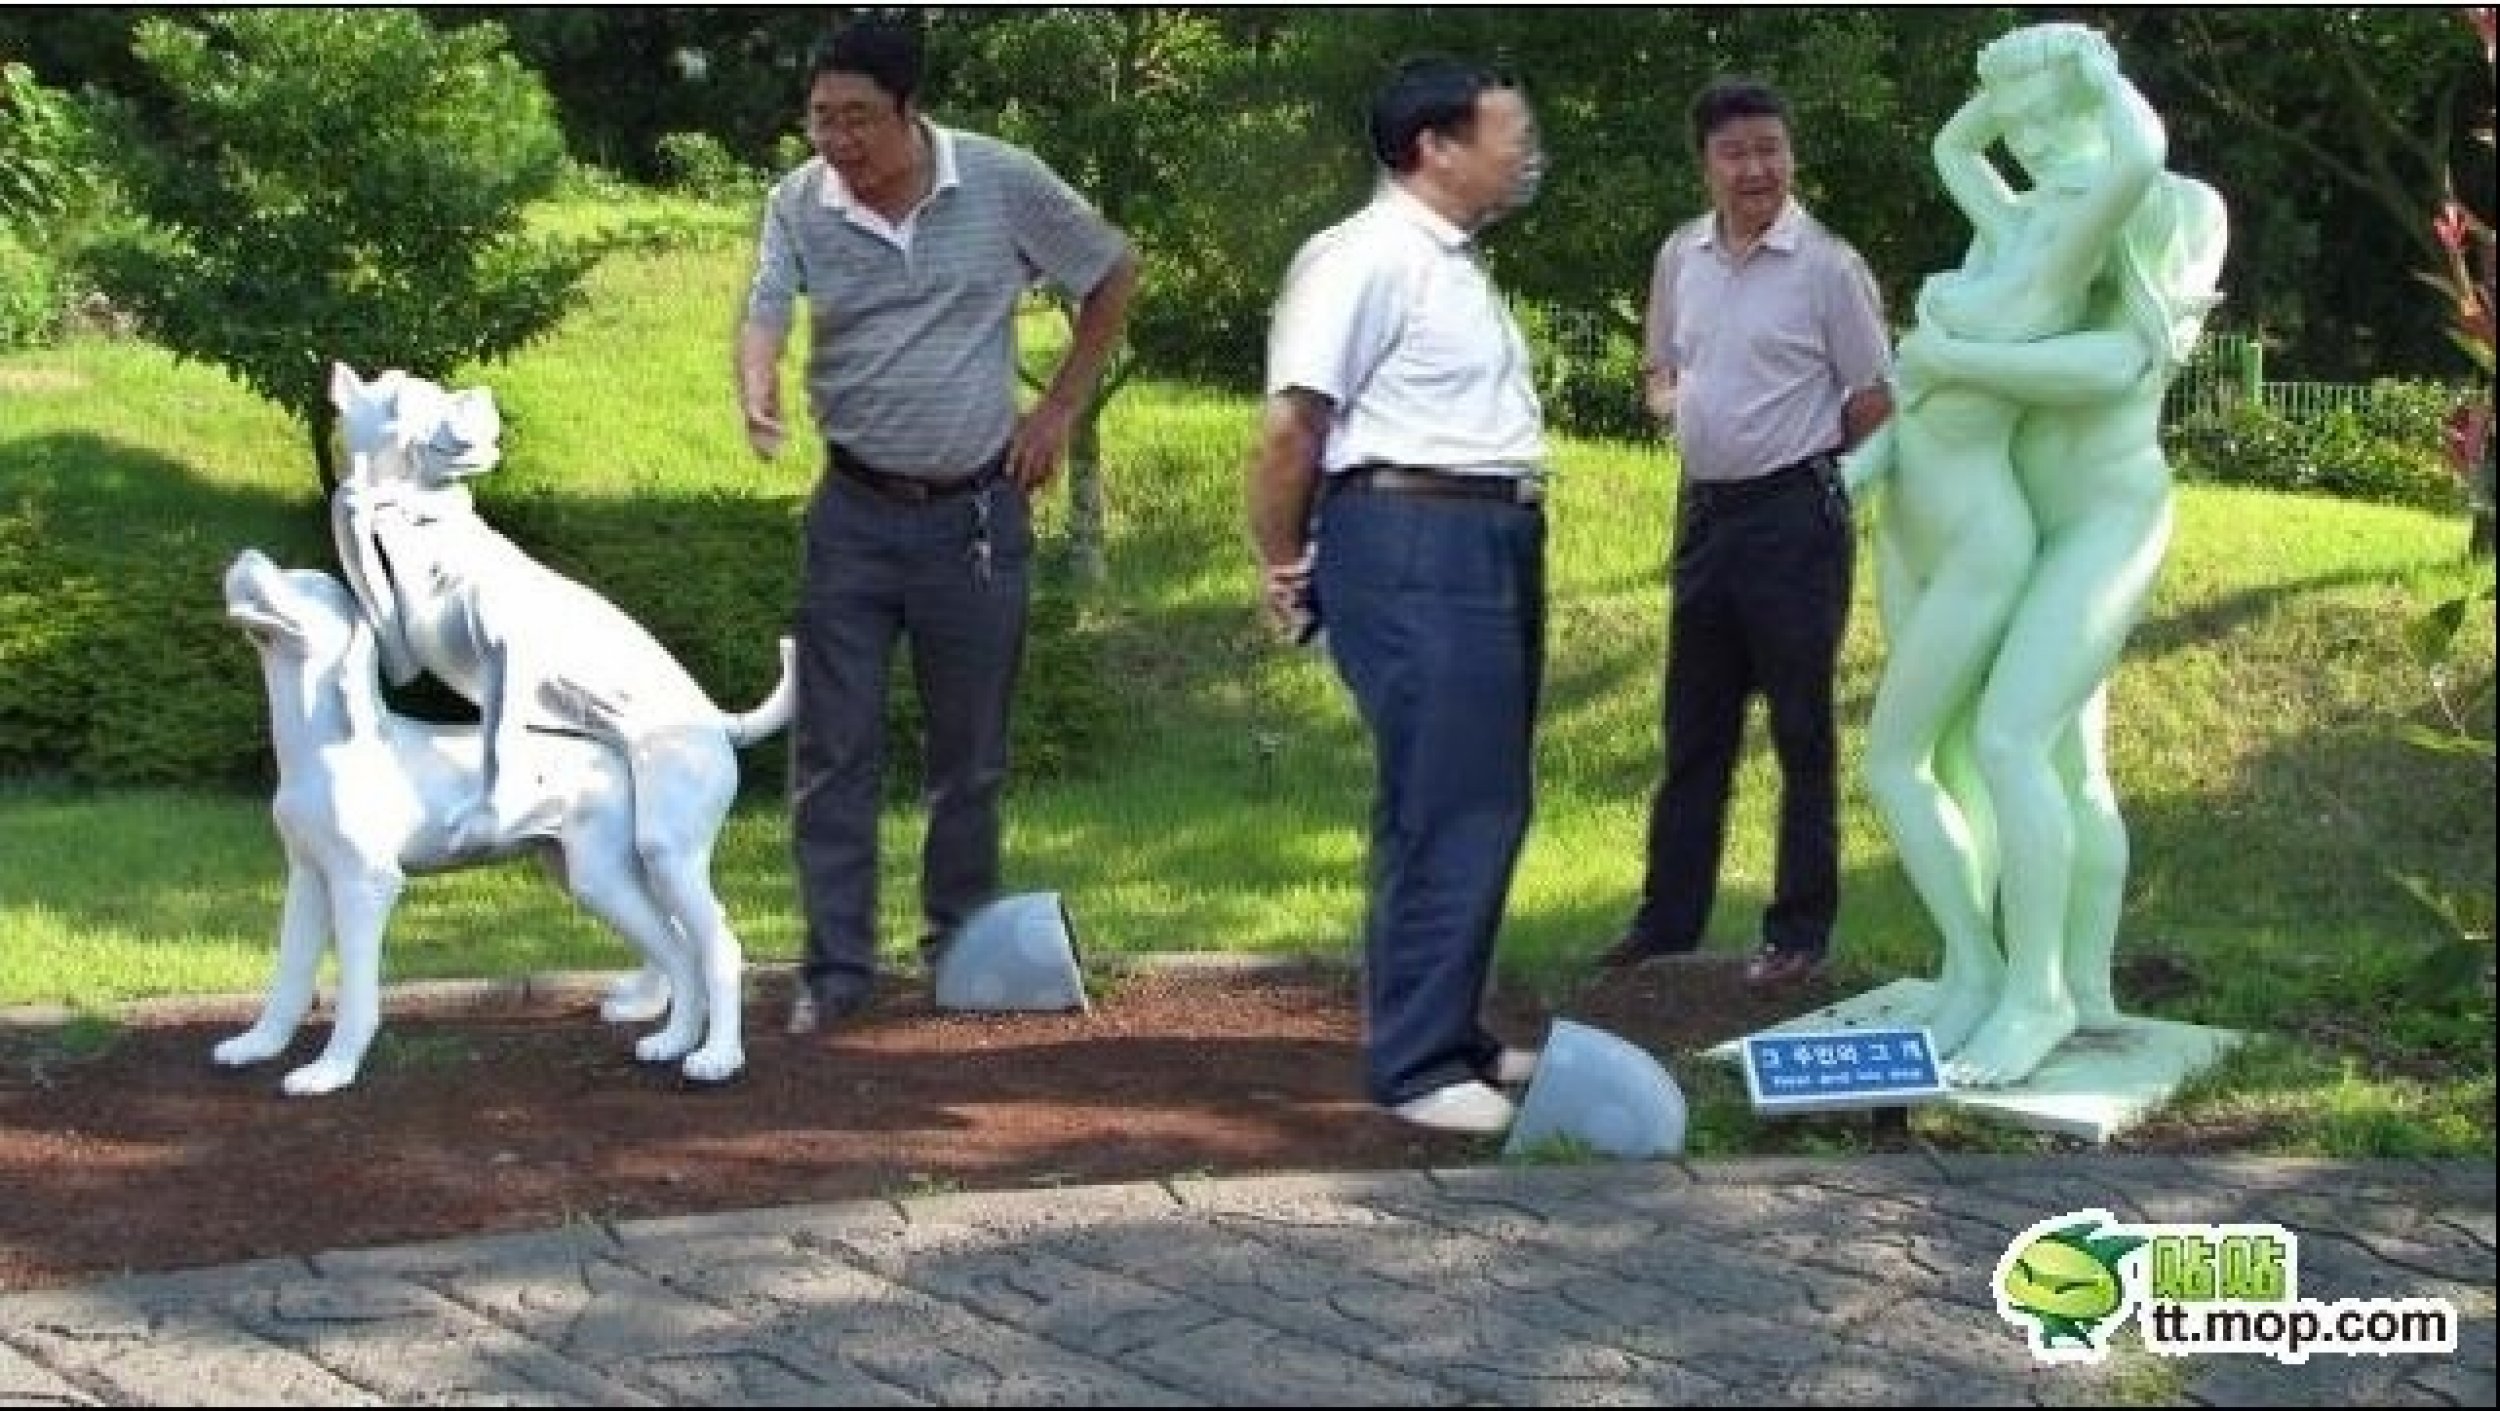 The 3 Chinese government officials appreciate the art work.